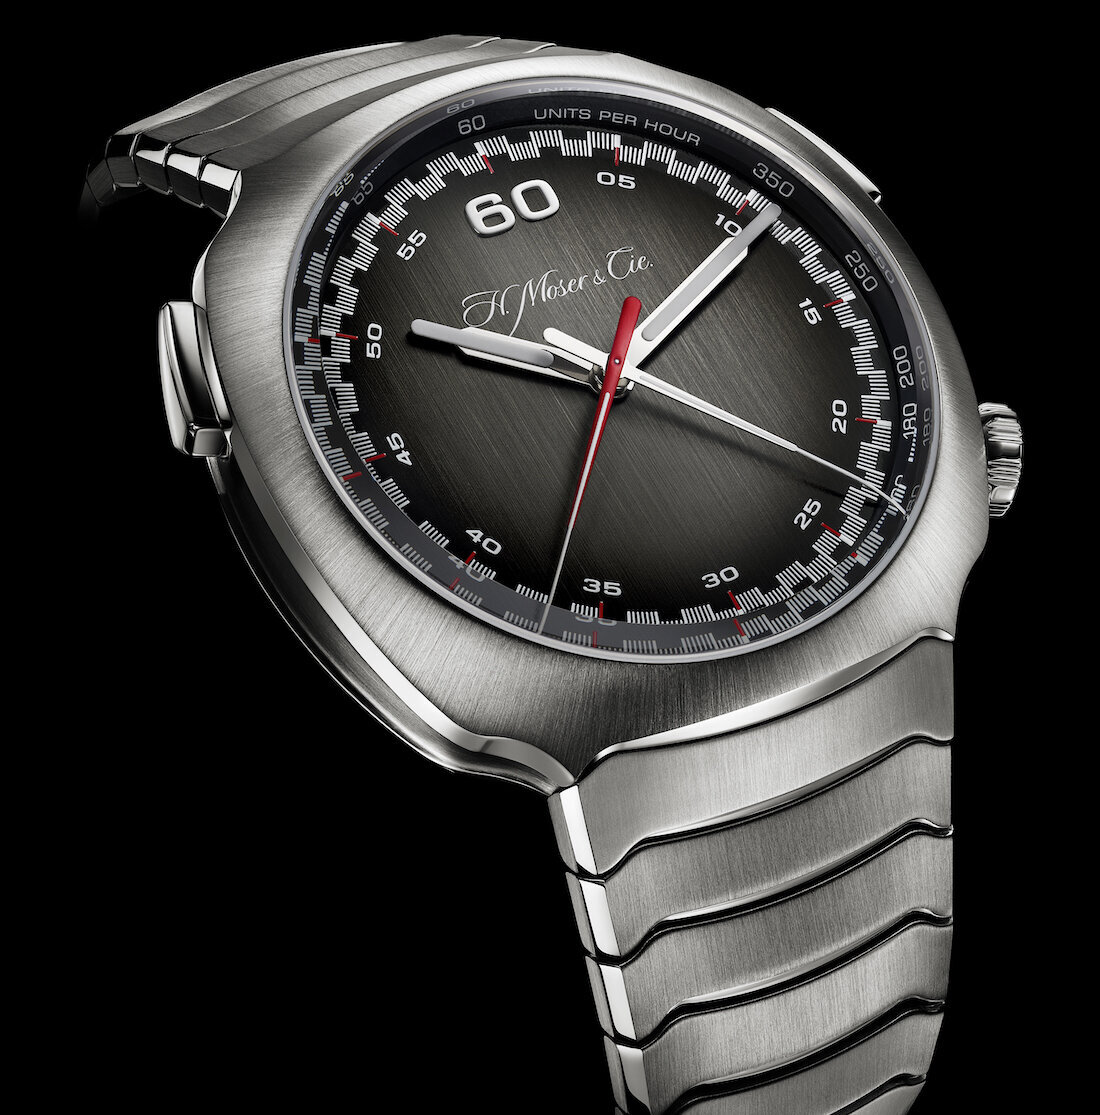 HMoserCie+Streamliner+Flyback+Chronograph+Automatic+WCL13.jpg